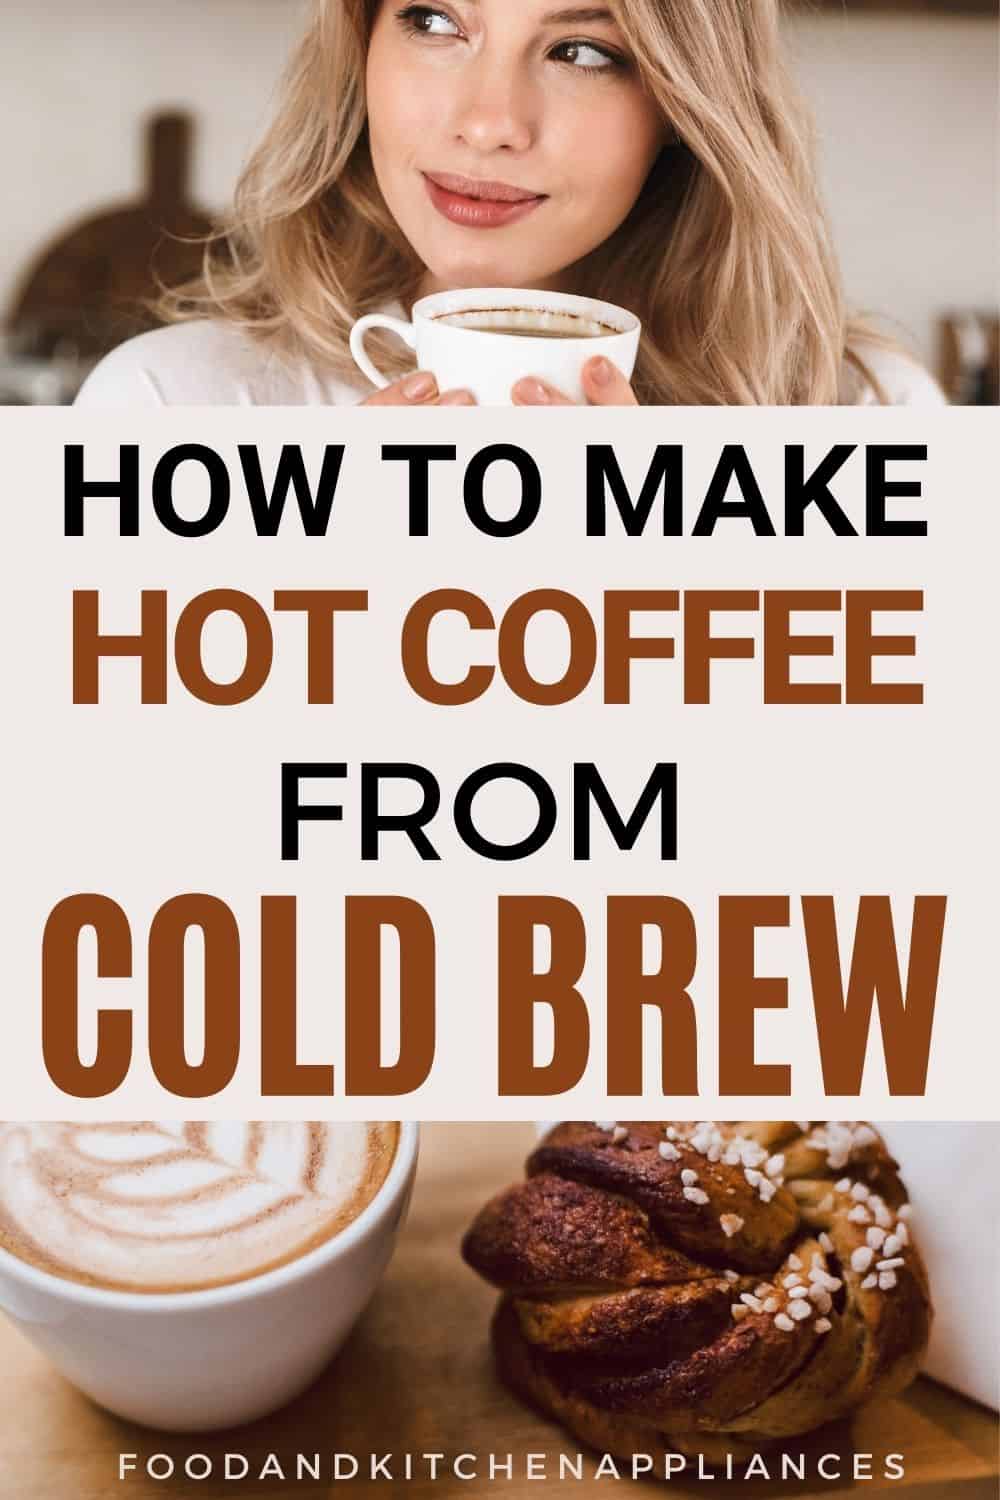 Is it okay to heat cold brew